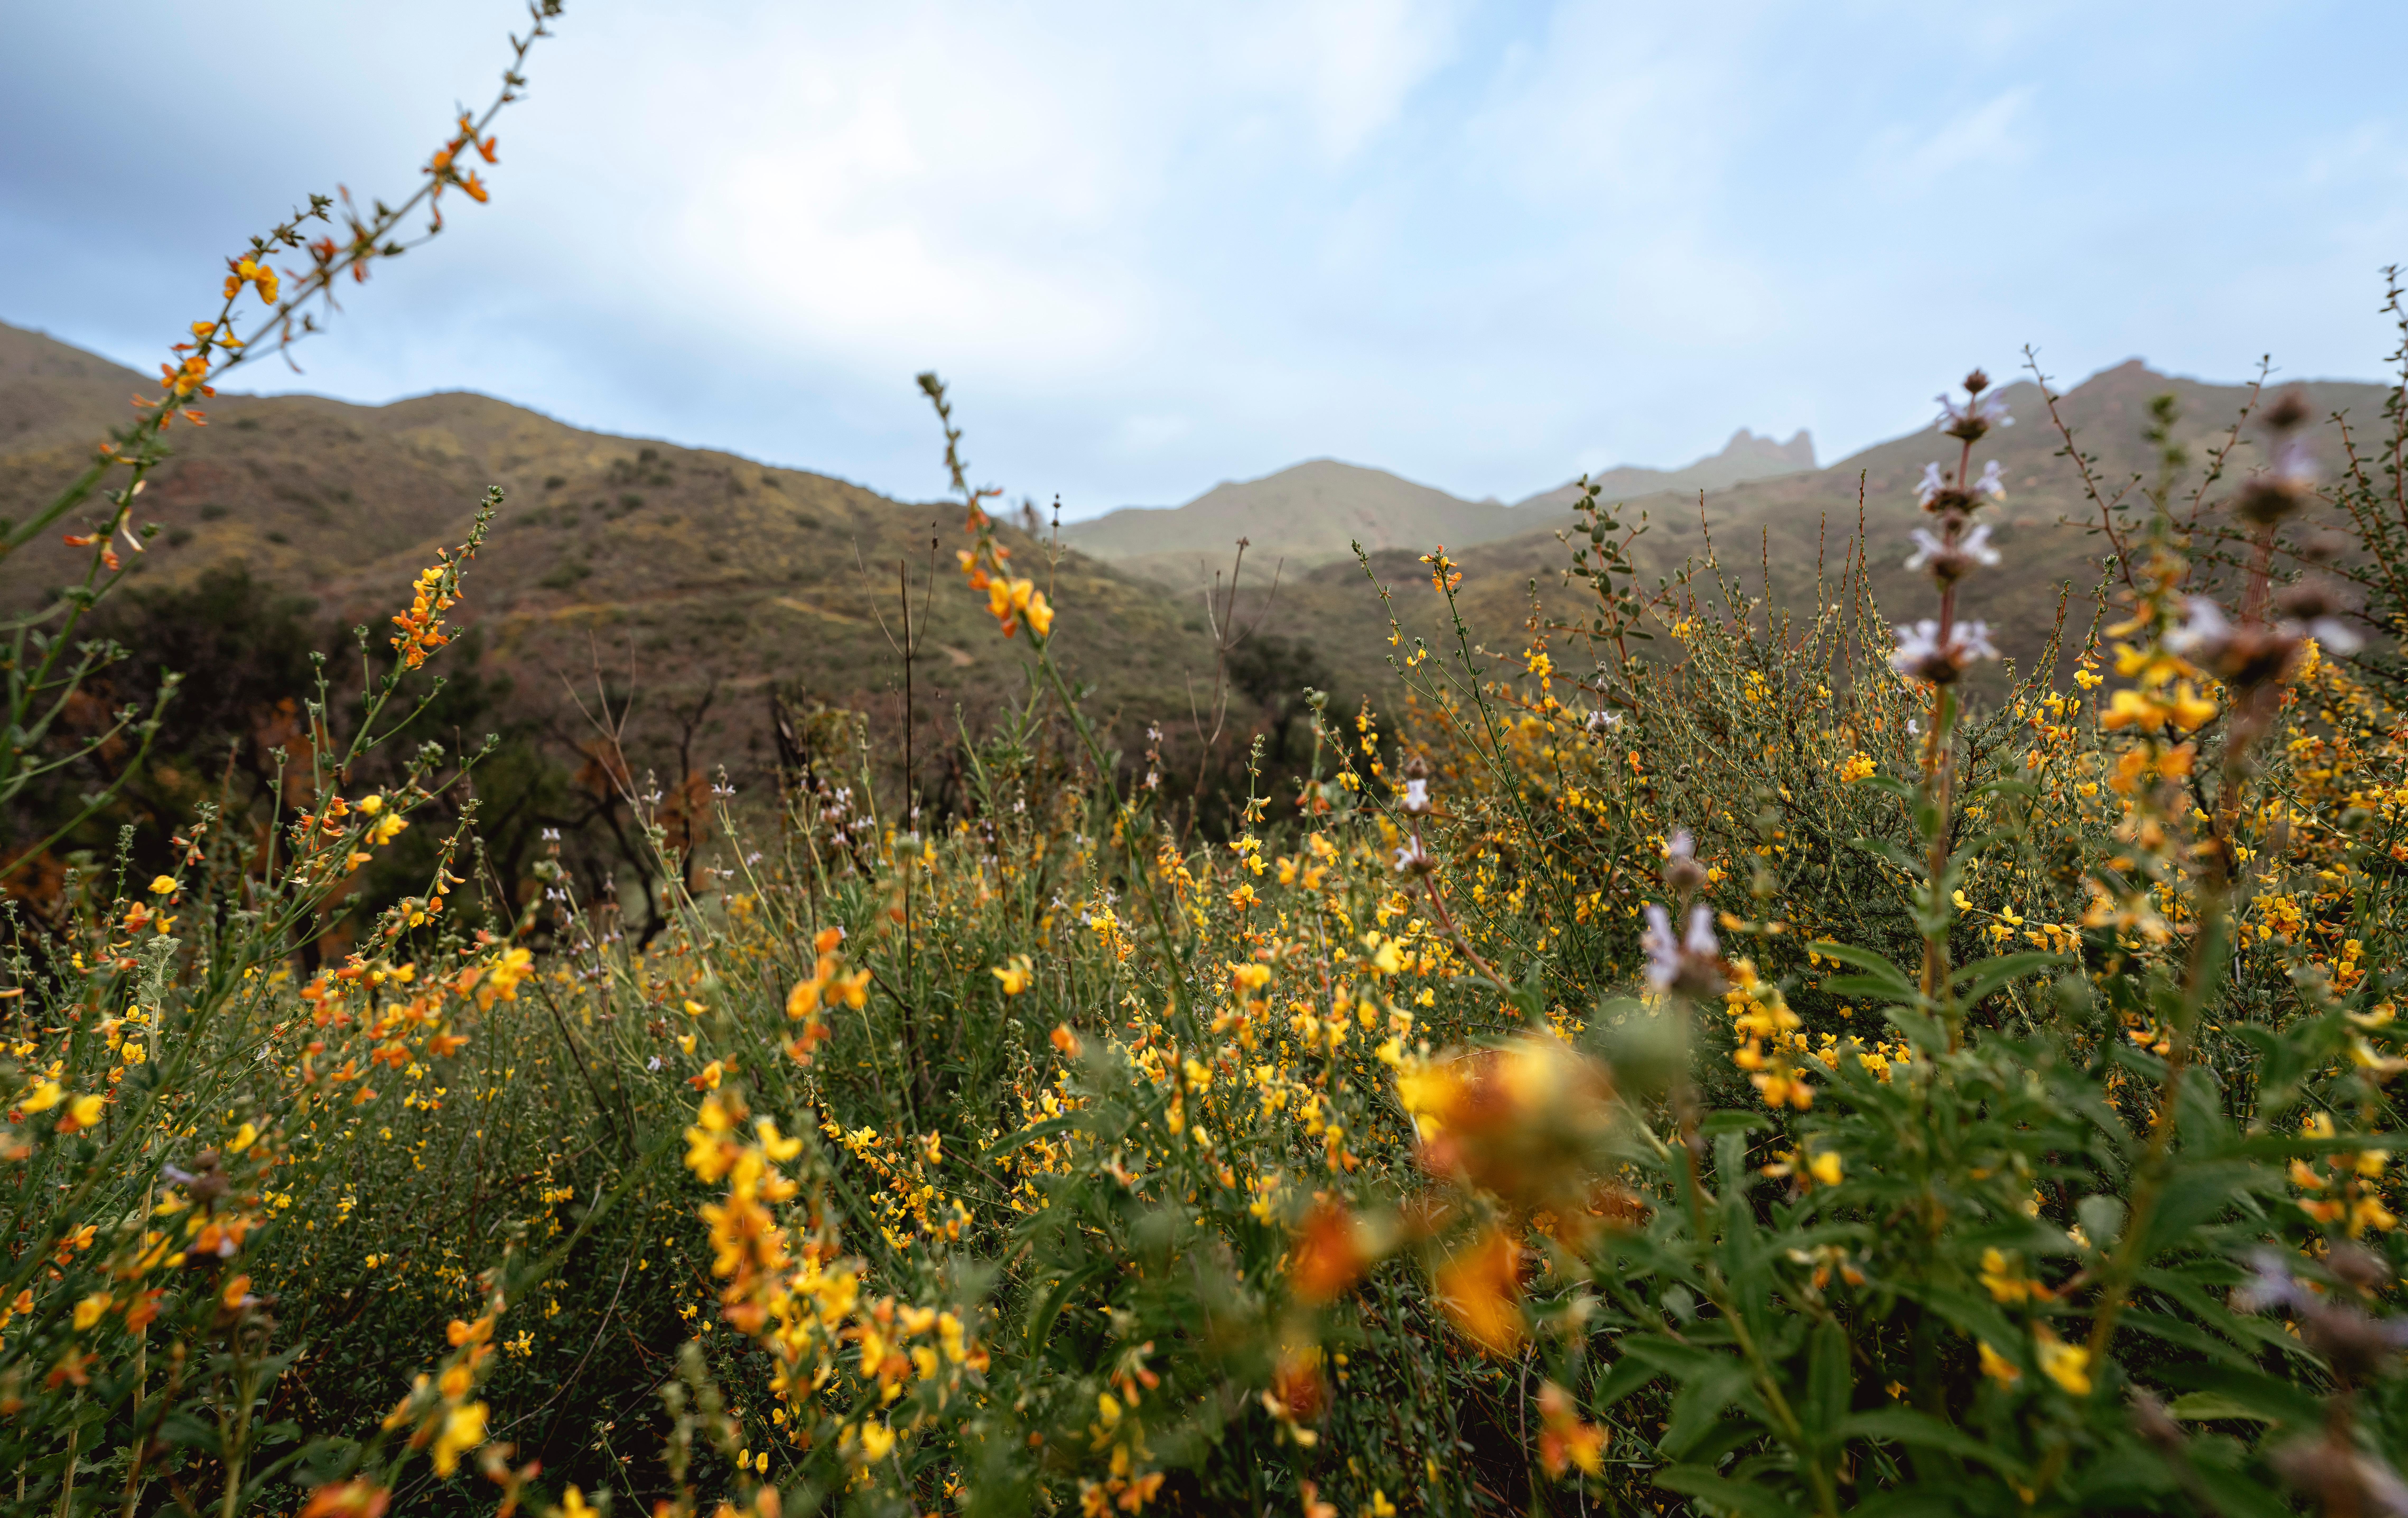 Trail view with yellow flowers in the foreground that lead to green mountains against a blue sky.